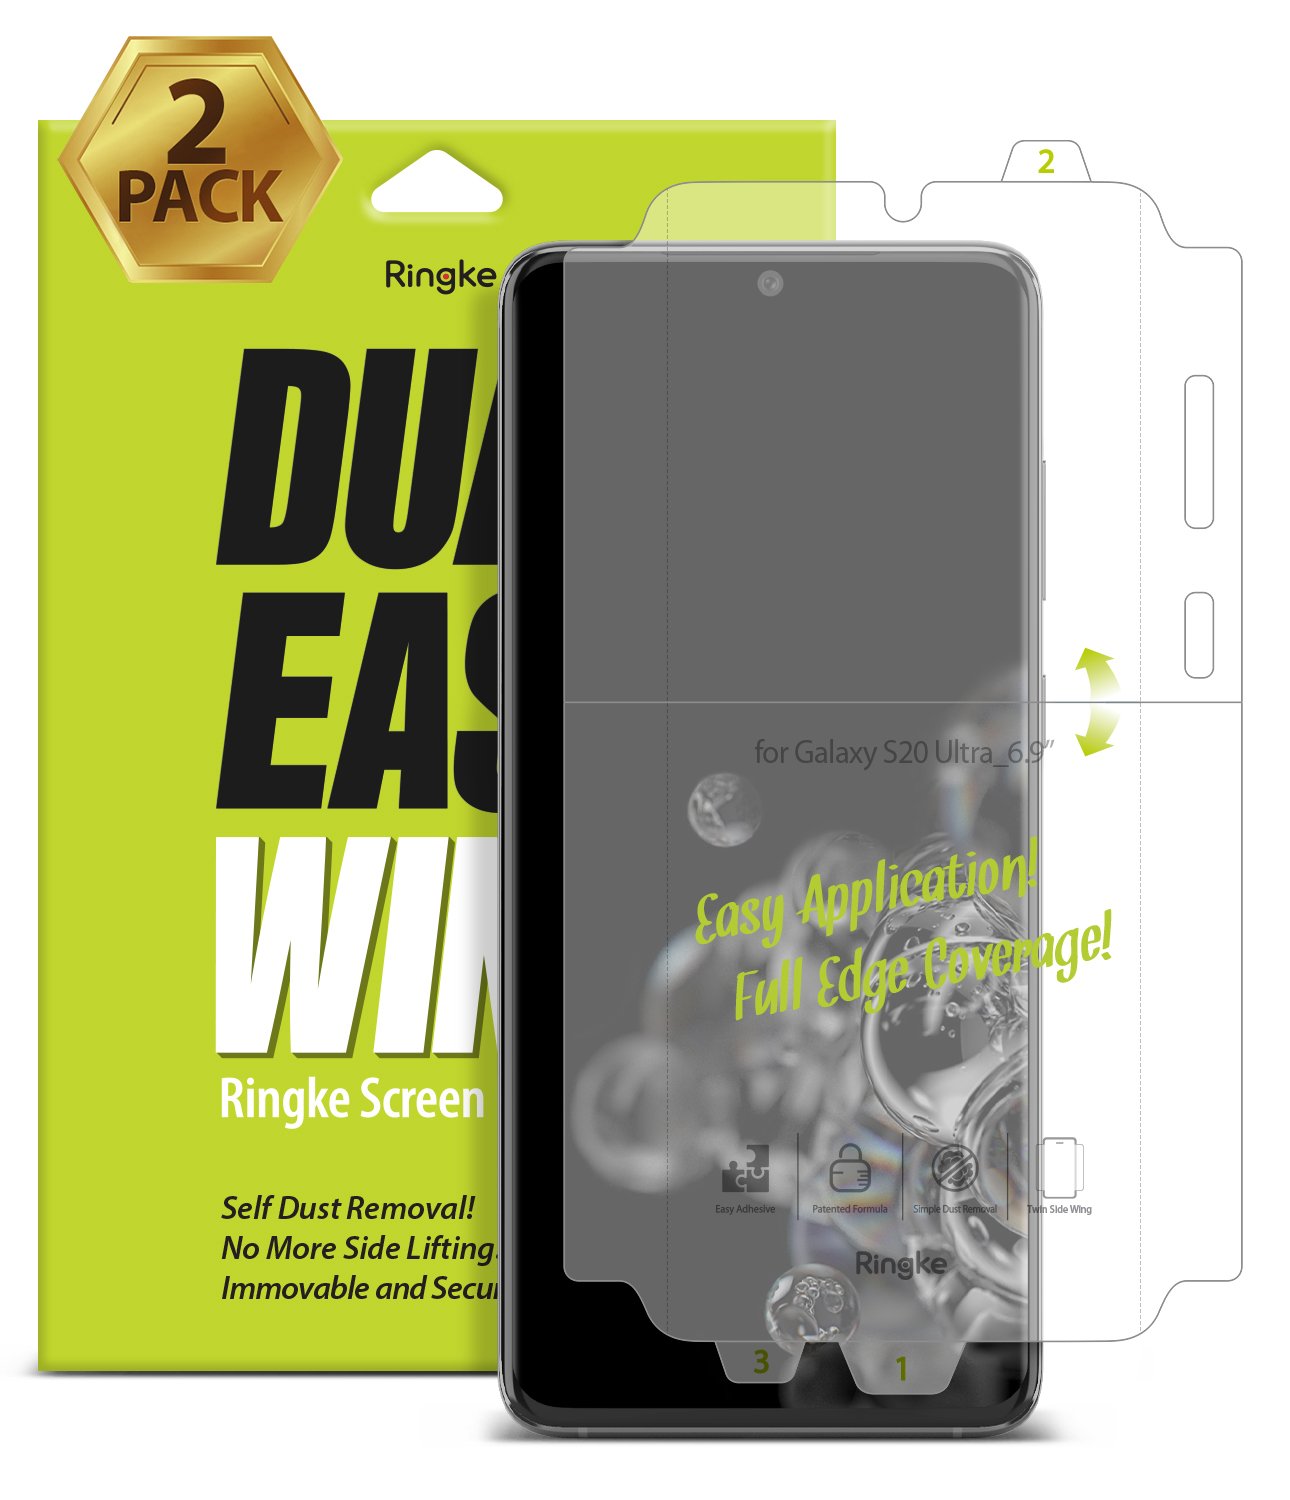 Ringke Galaxy S20 Ultra, Dual Easy Film Wing, Screen Protector, 2 pack